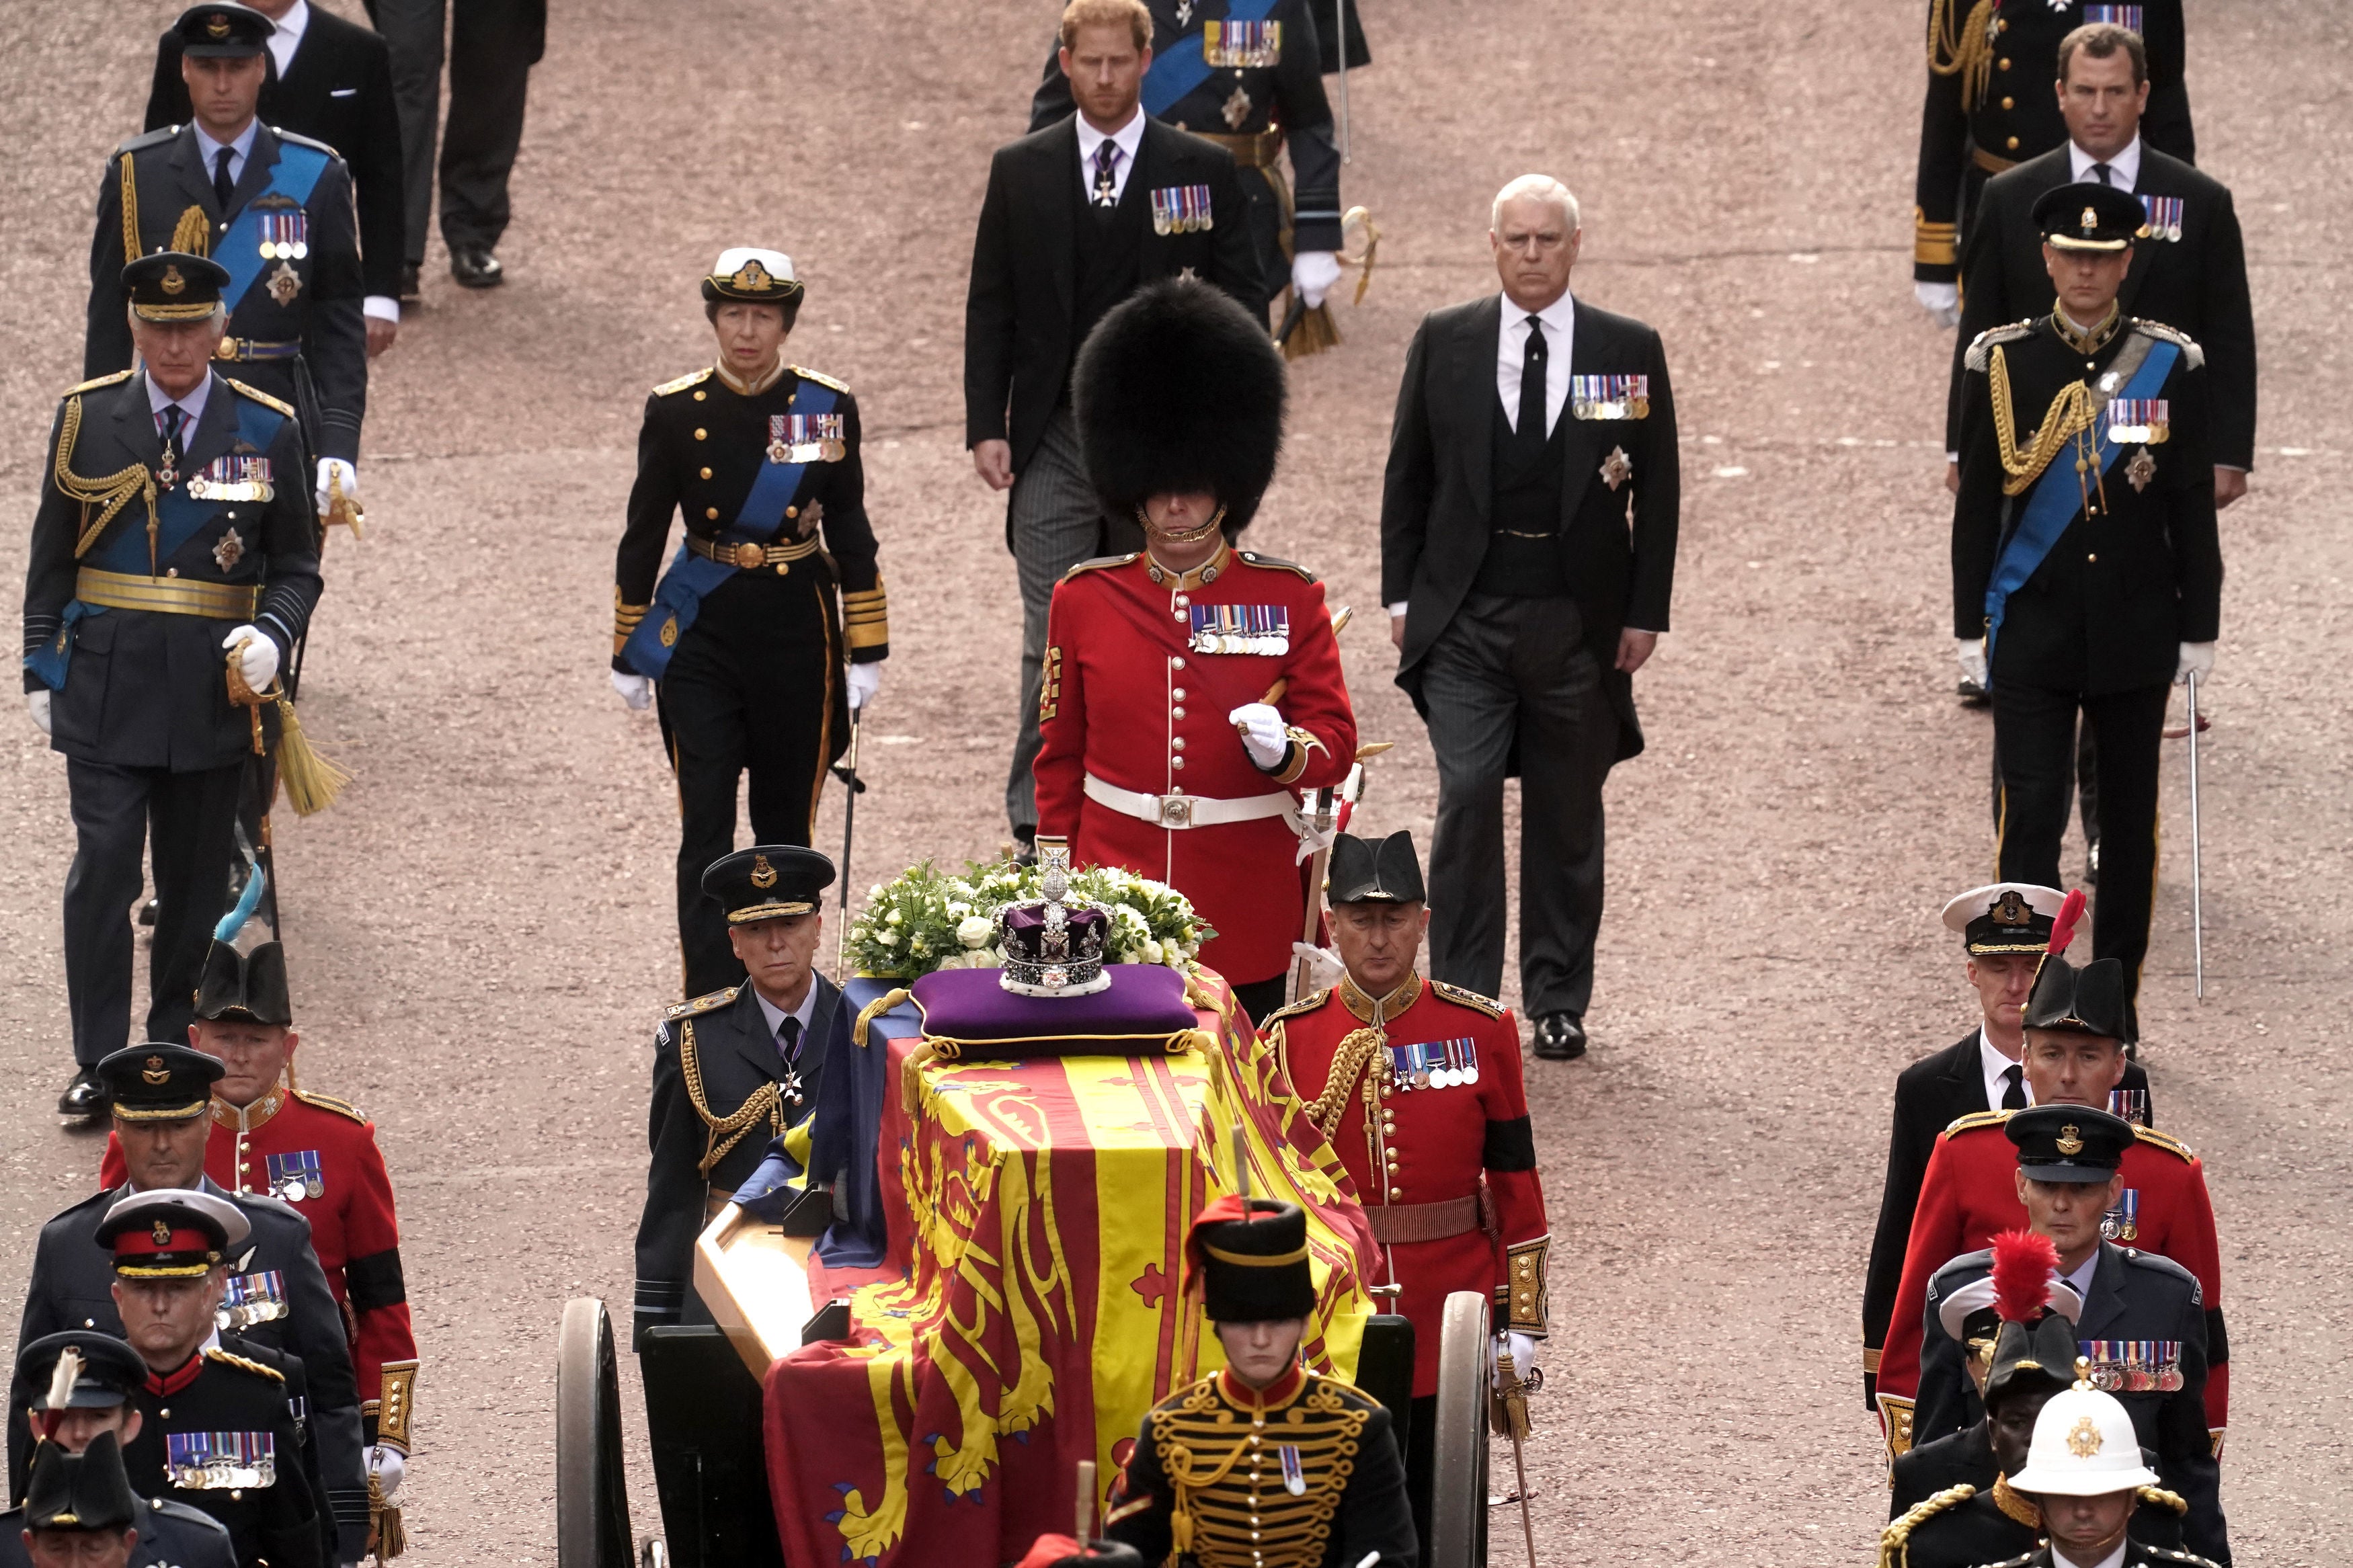 Members of the British royal family follow Queen Elizabeth II’s coffin during ceremonial procession